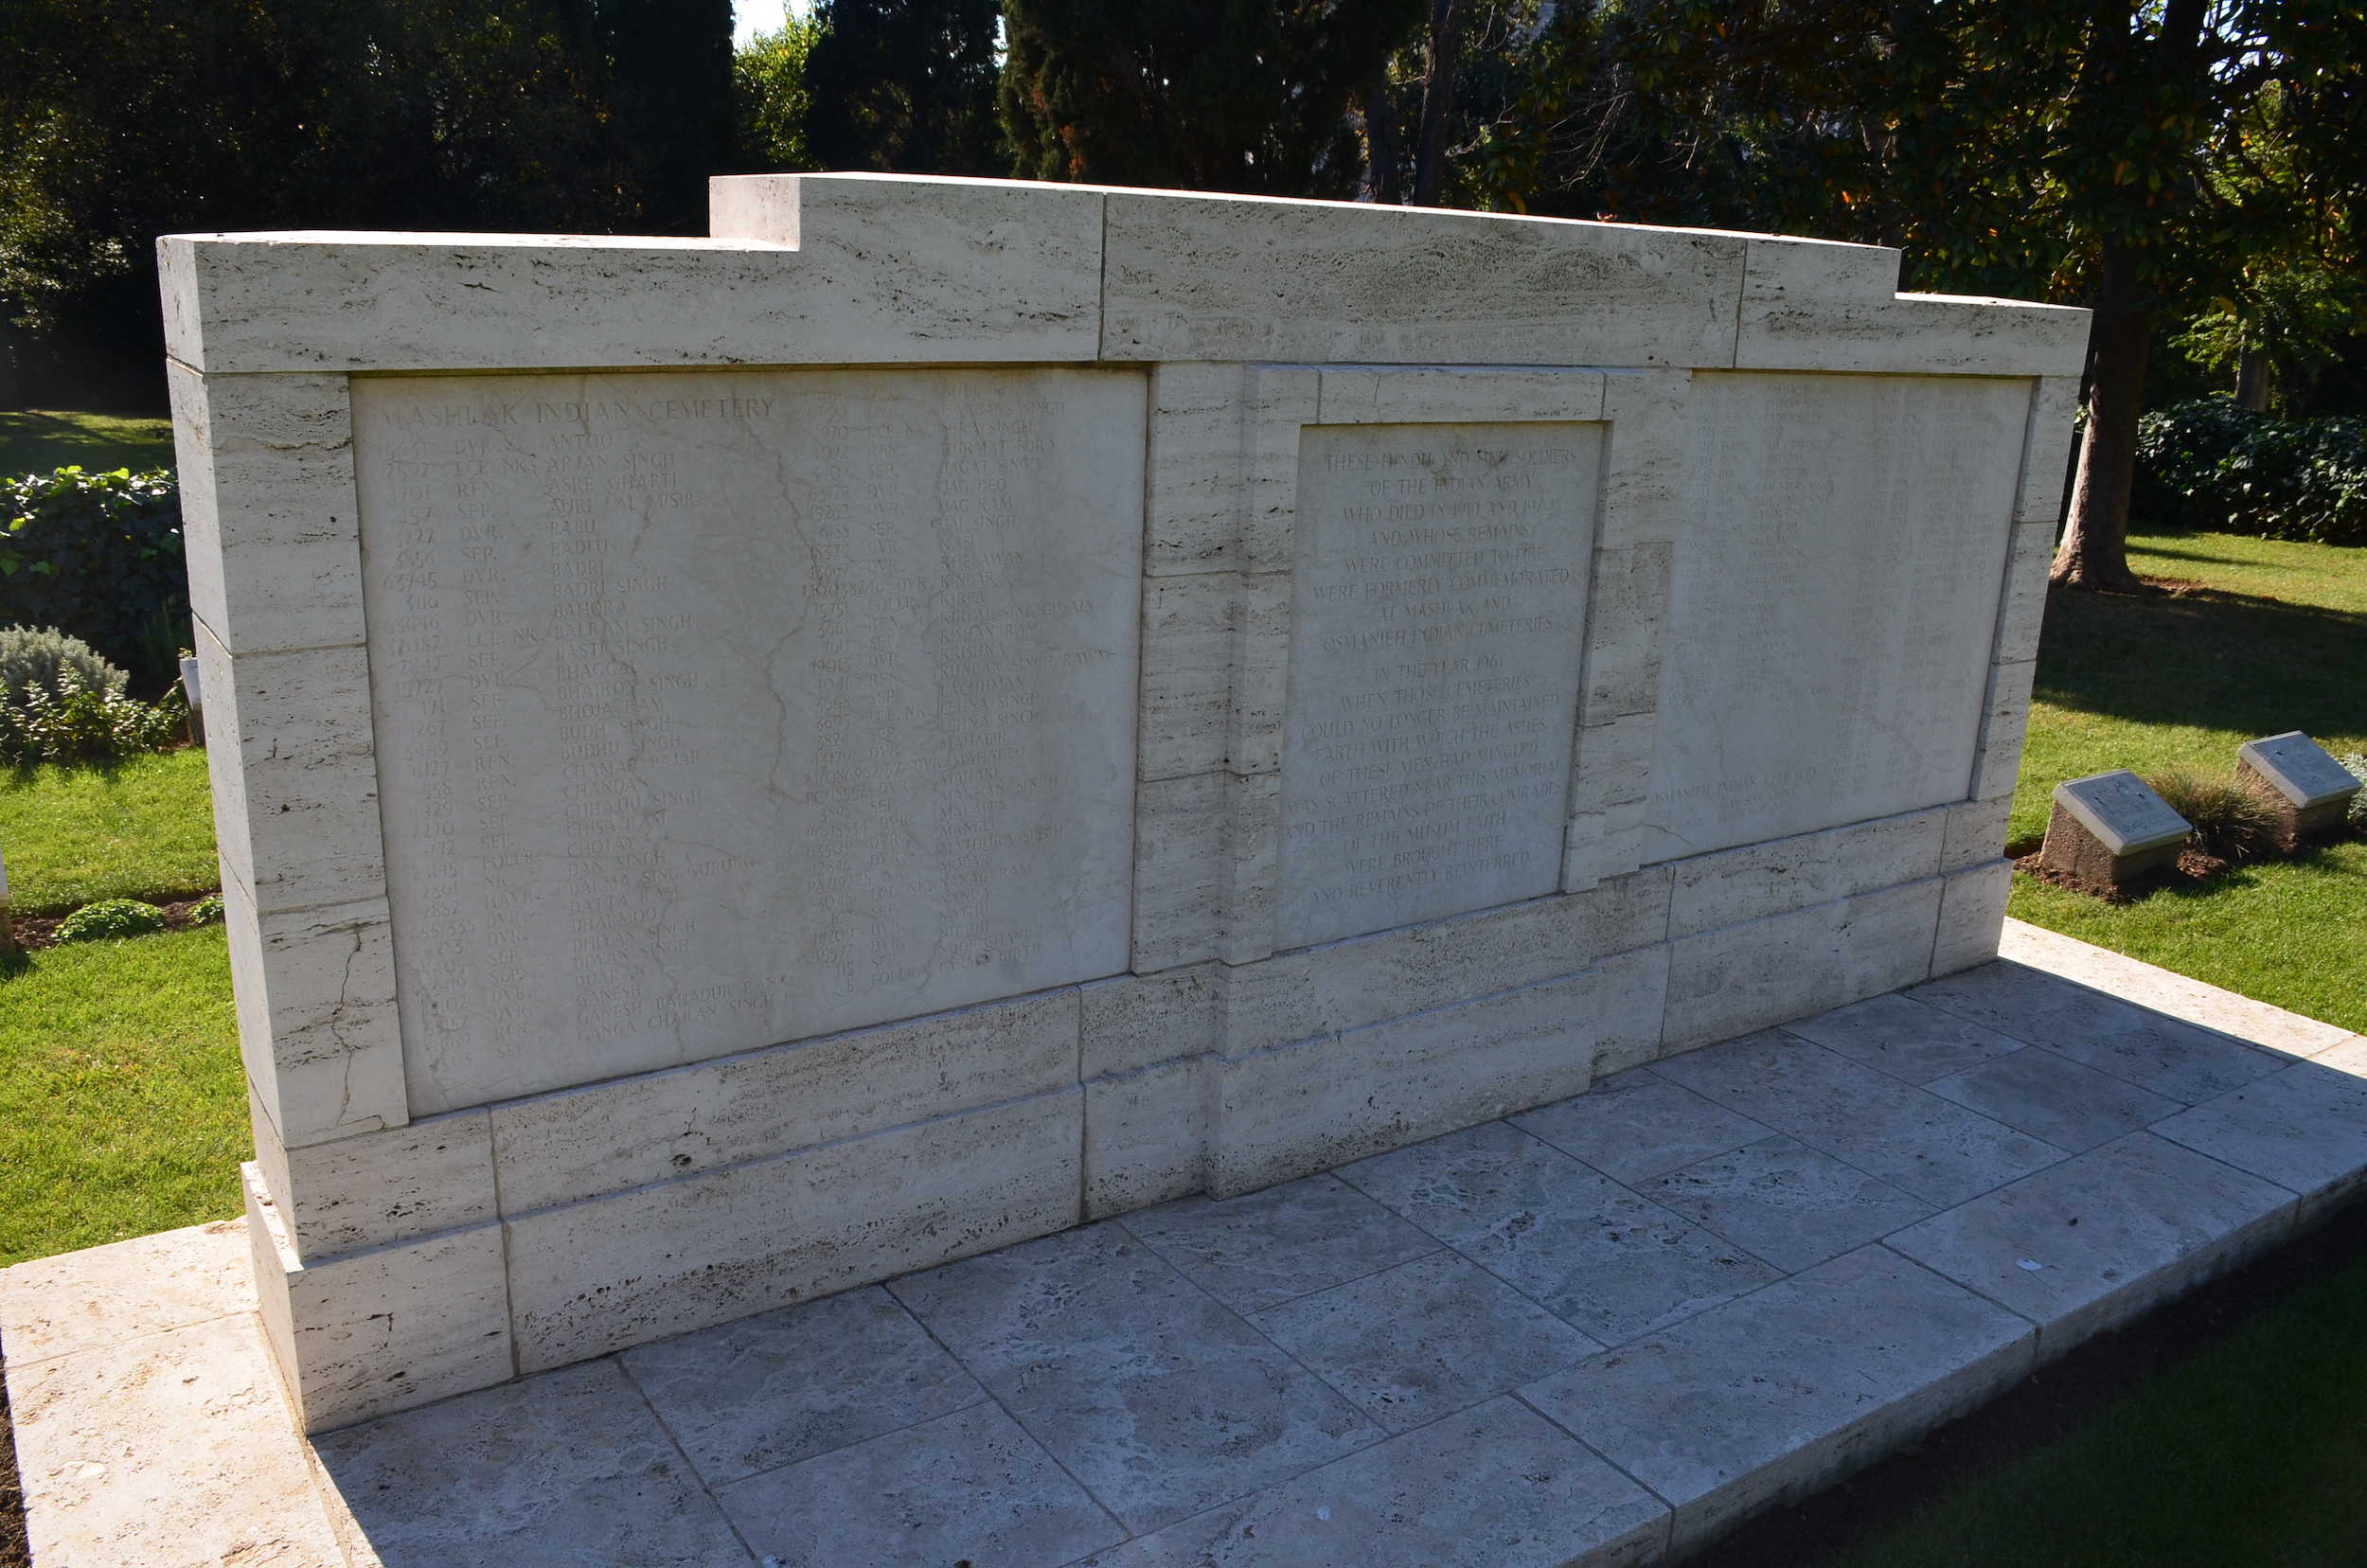 Memorial to soldiers of the Indian Army at the Haidar Pasha Cemetery in Istanbul, Turkey